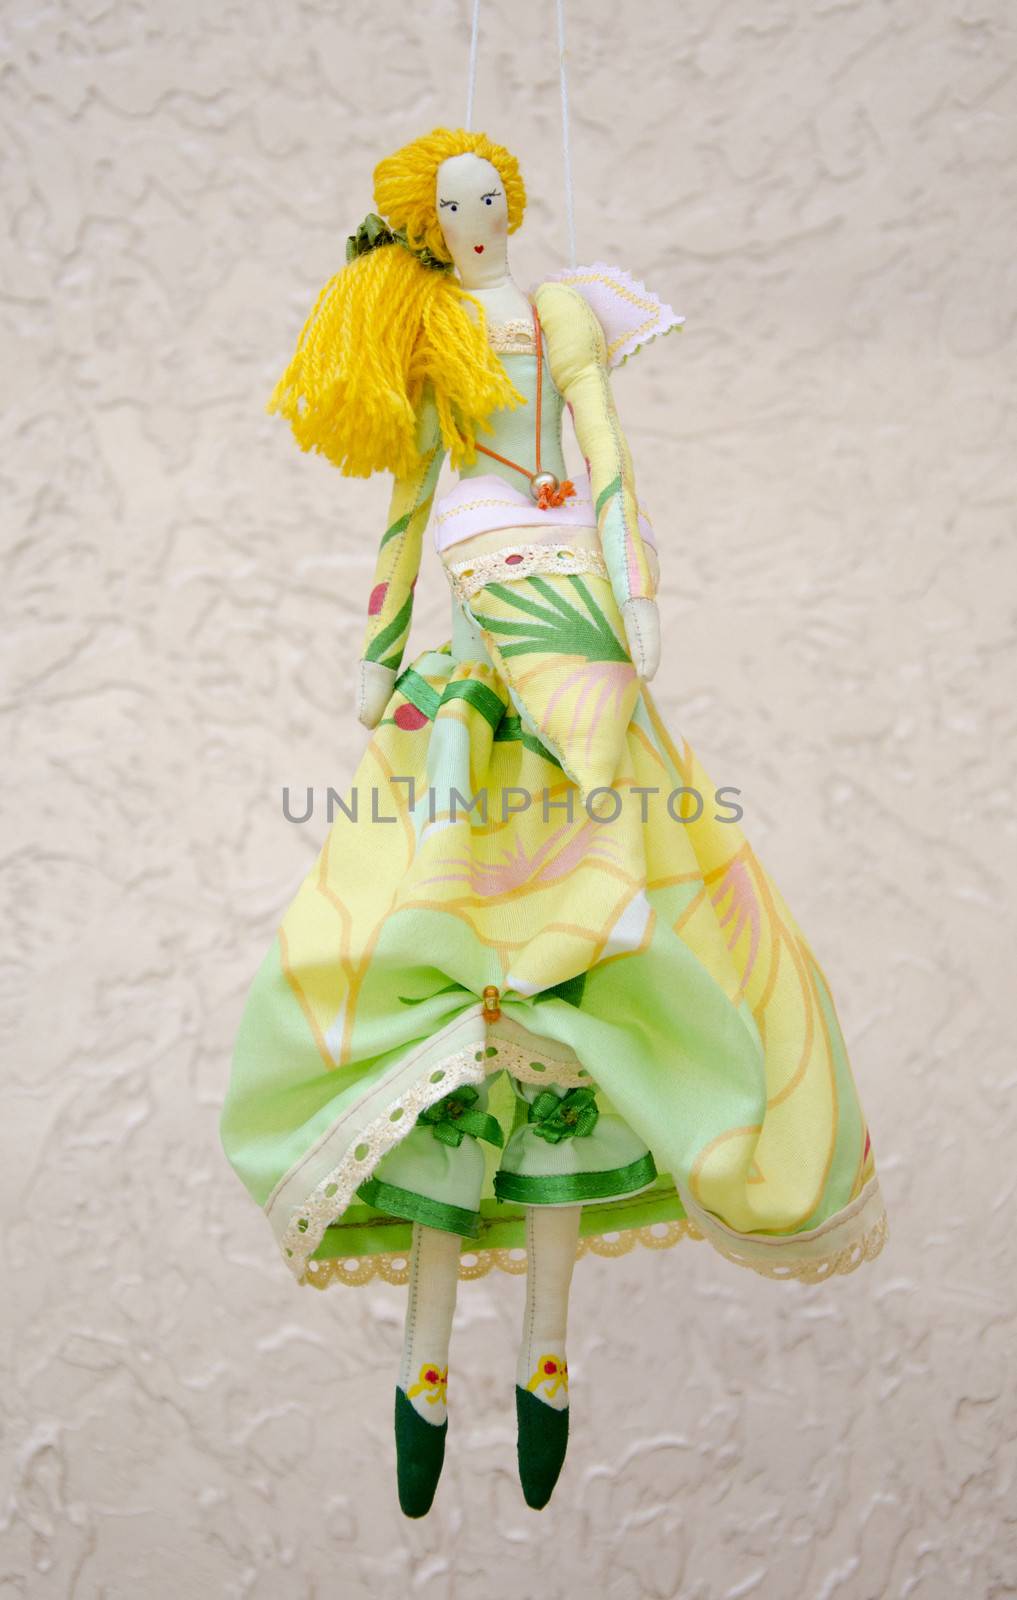 Handmade doll in a ball gown with wings and a bag in the shape of heart